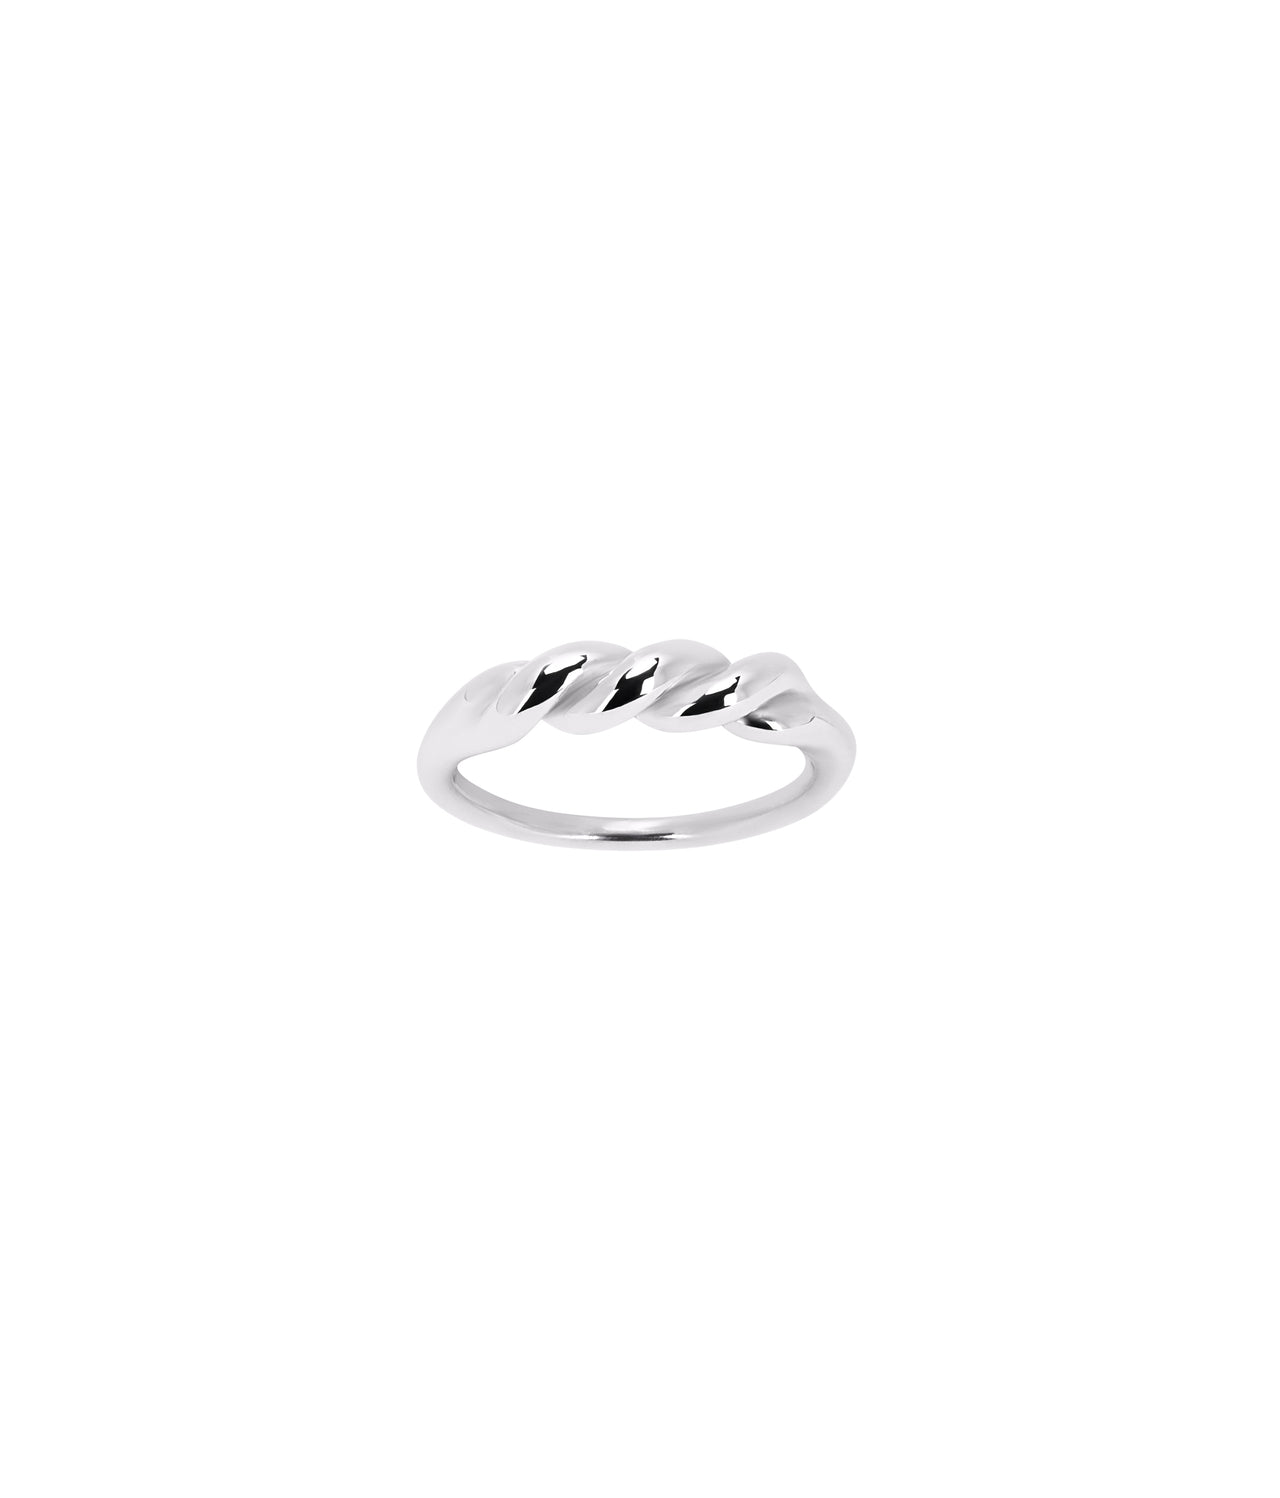 The Lila Ring